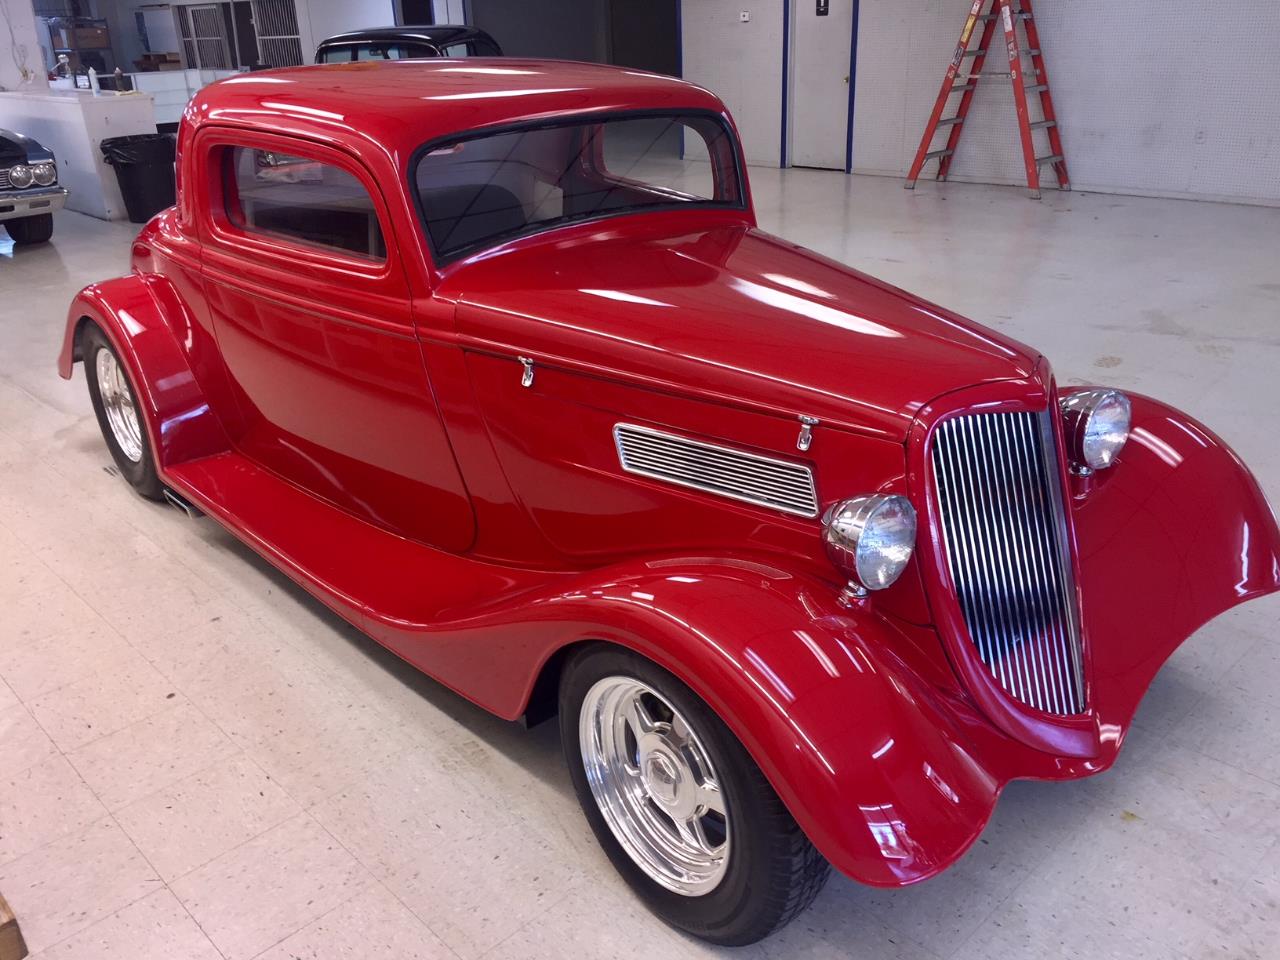 1934 Ford Coupe for Sale | 0 | CC-1155311